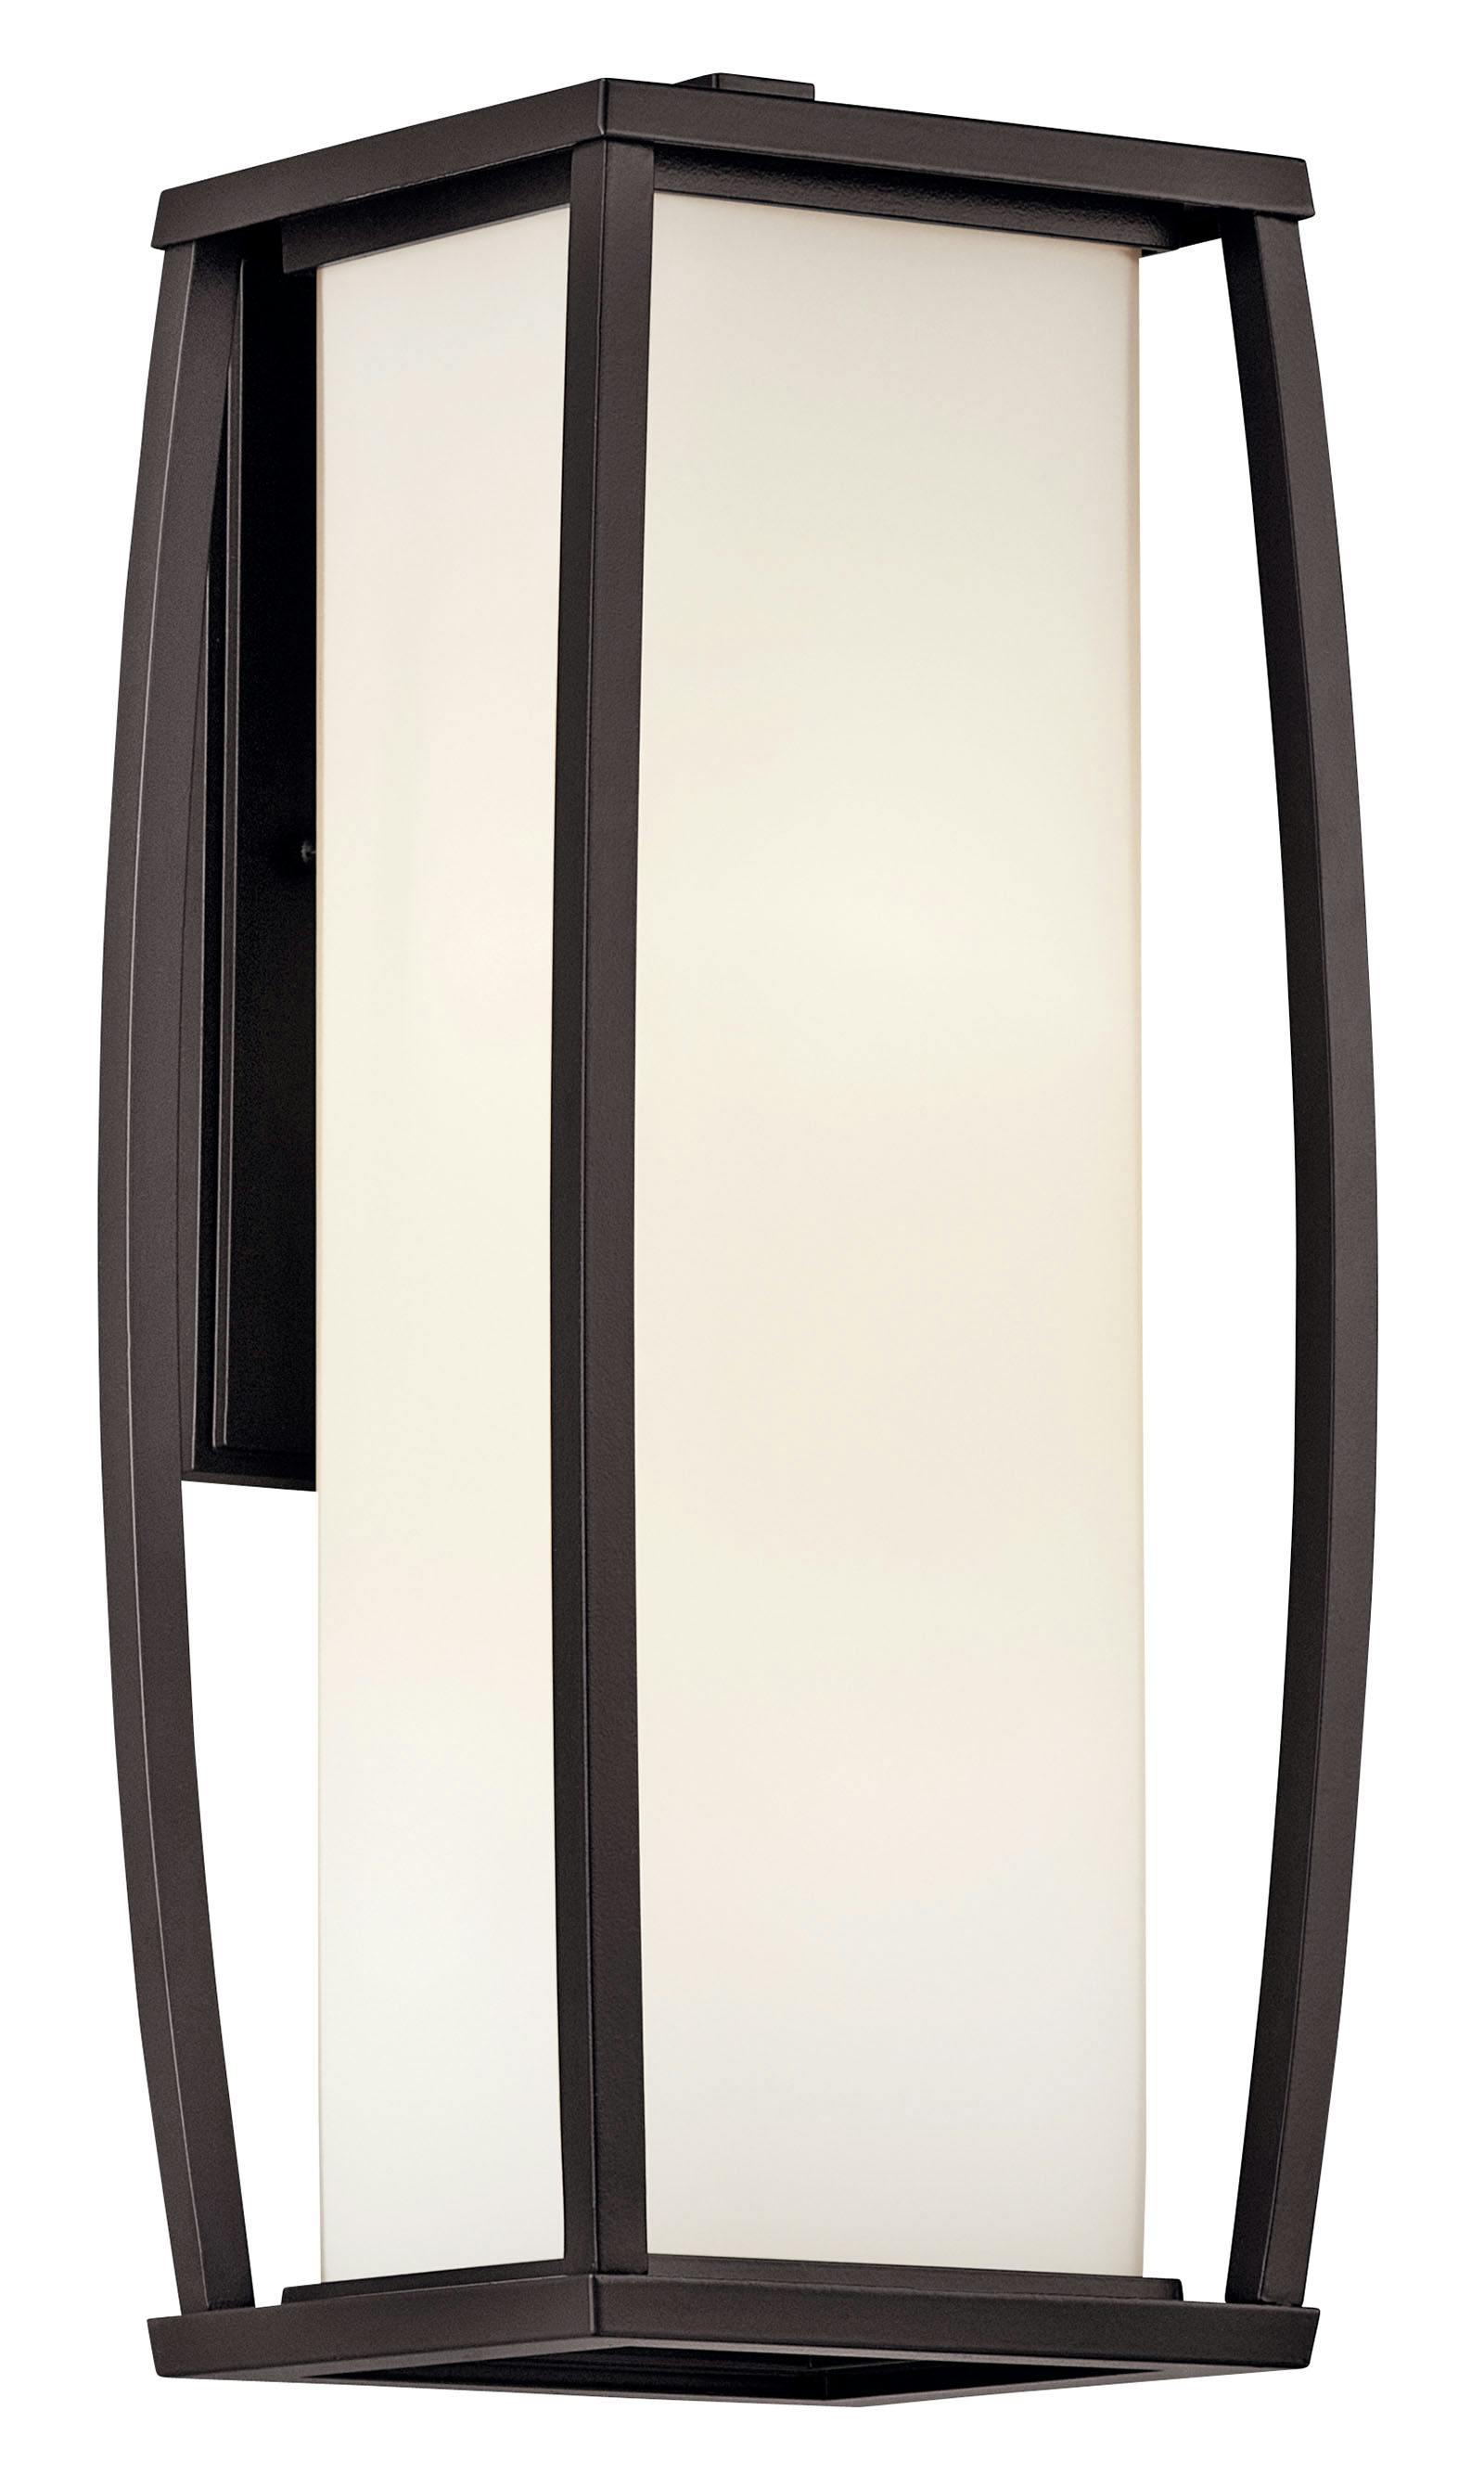 Bowen 18" Wall Light in a Bronze finish on a white background